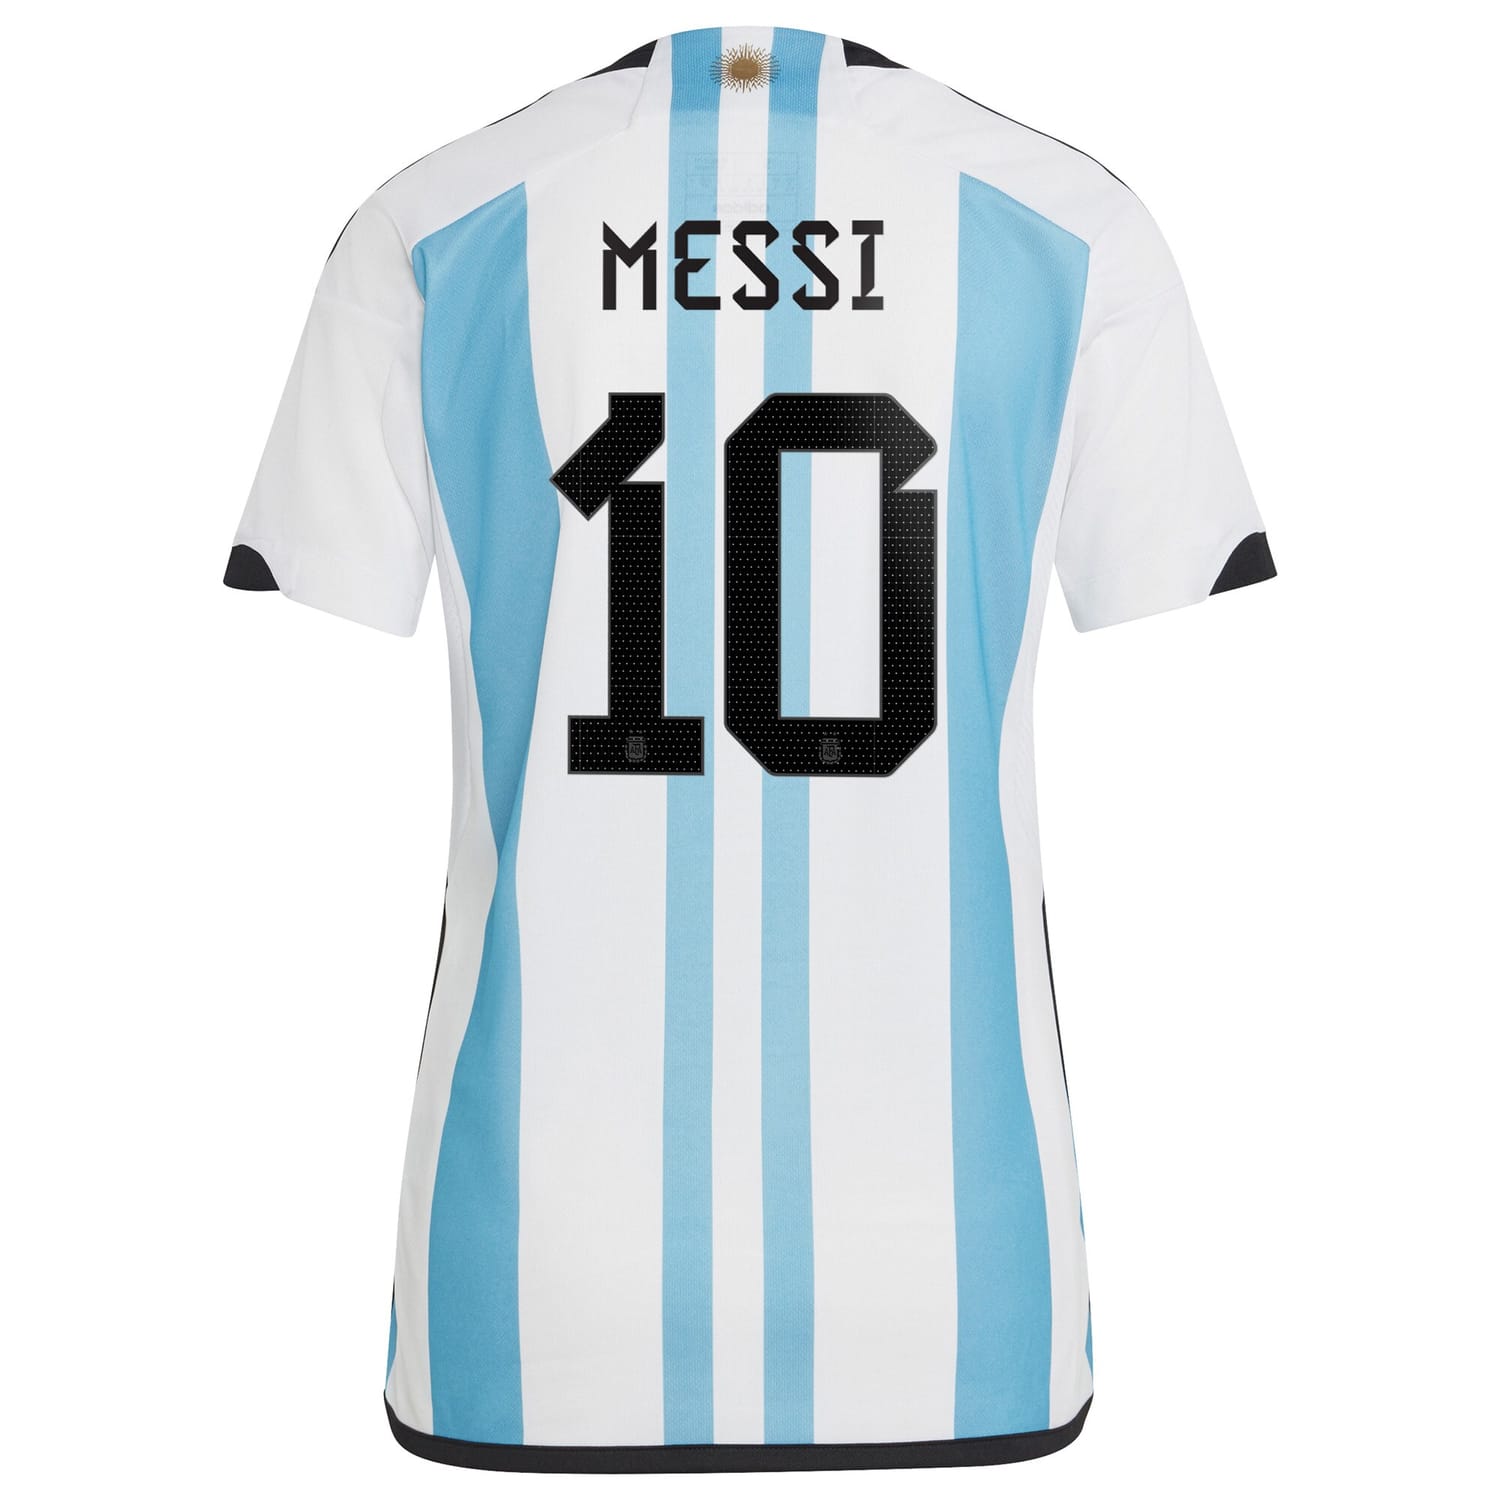 Argentina National Team Home Winners Jersey Shirt White/Light Blue 2022 player Lionel Messi printing for Women